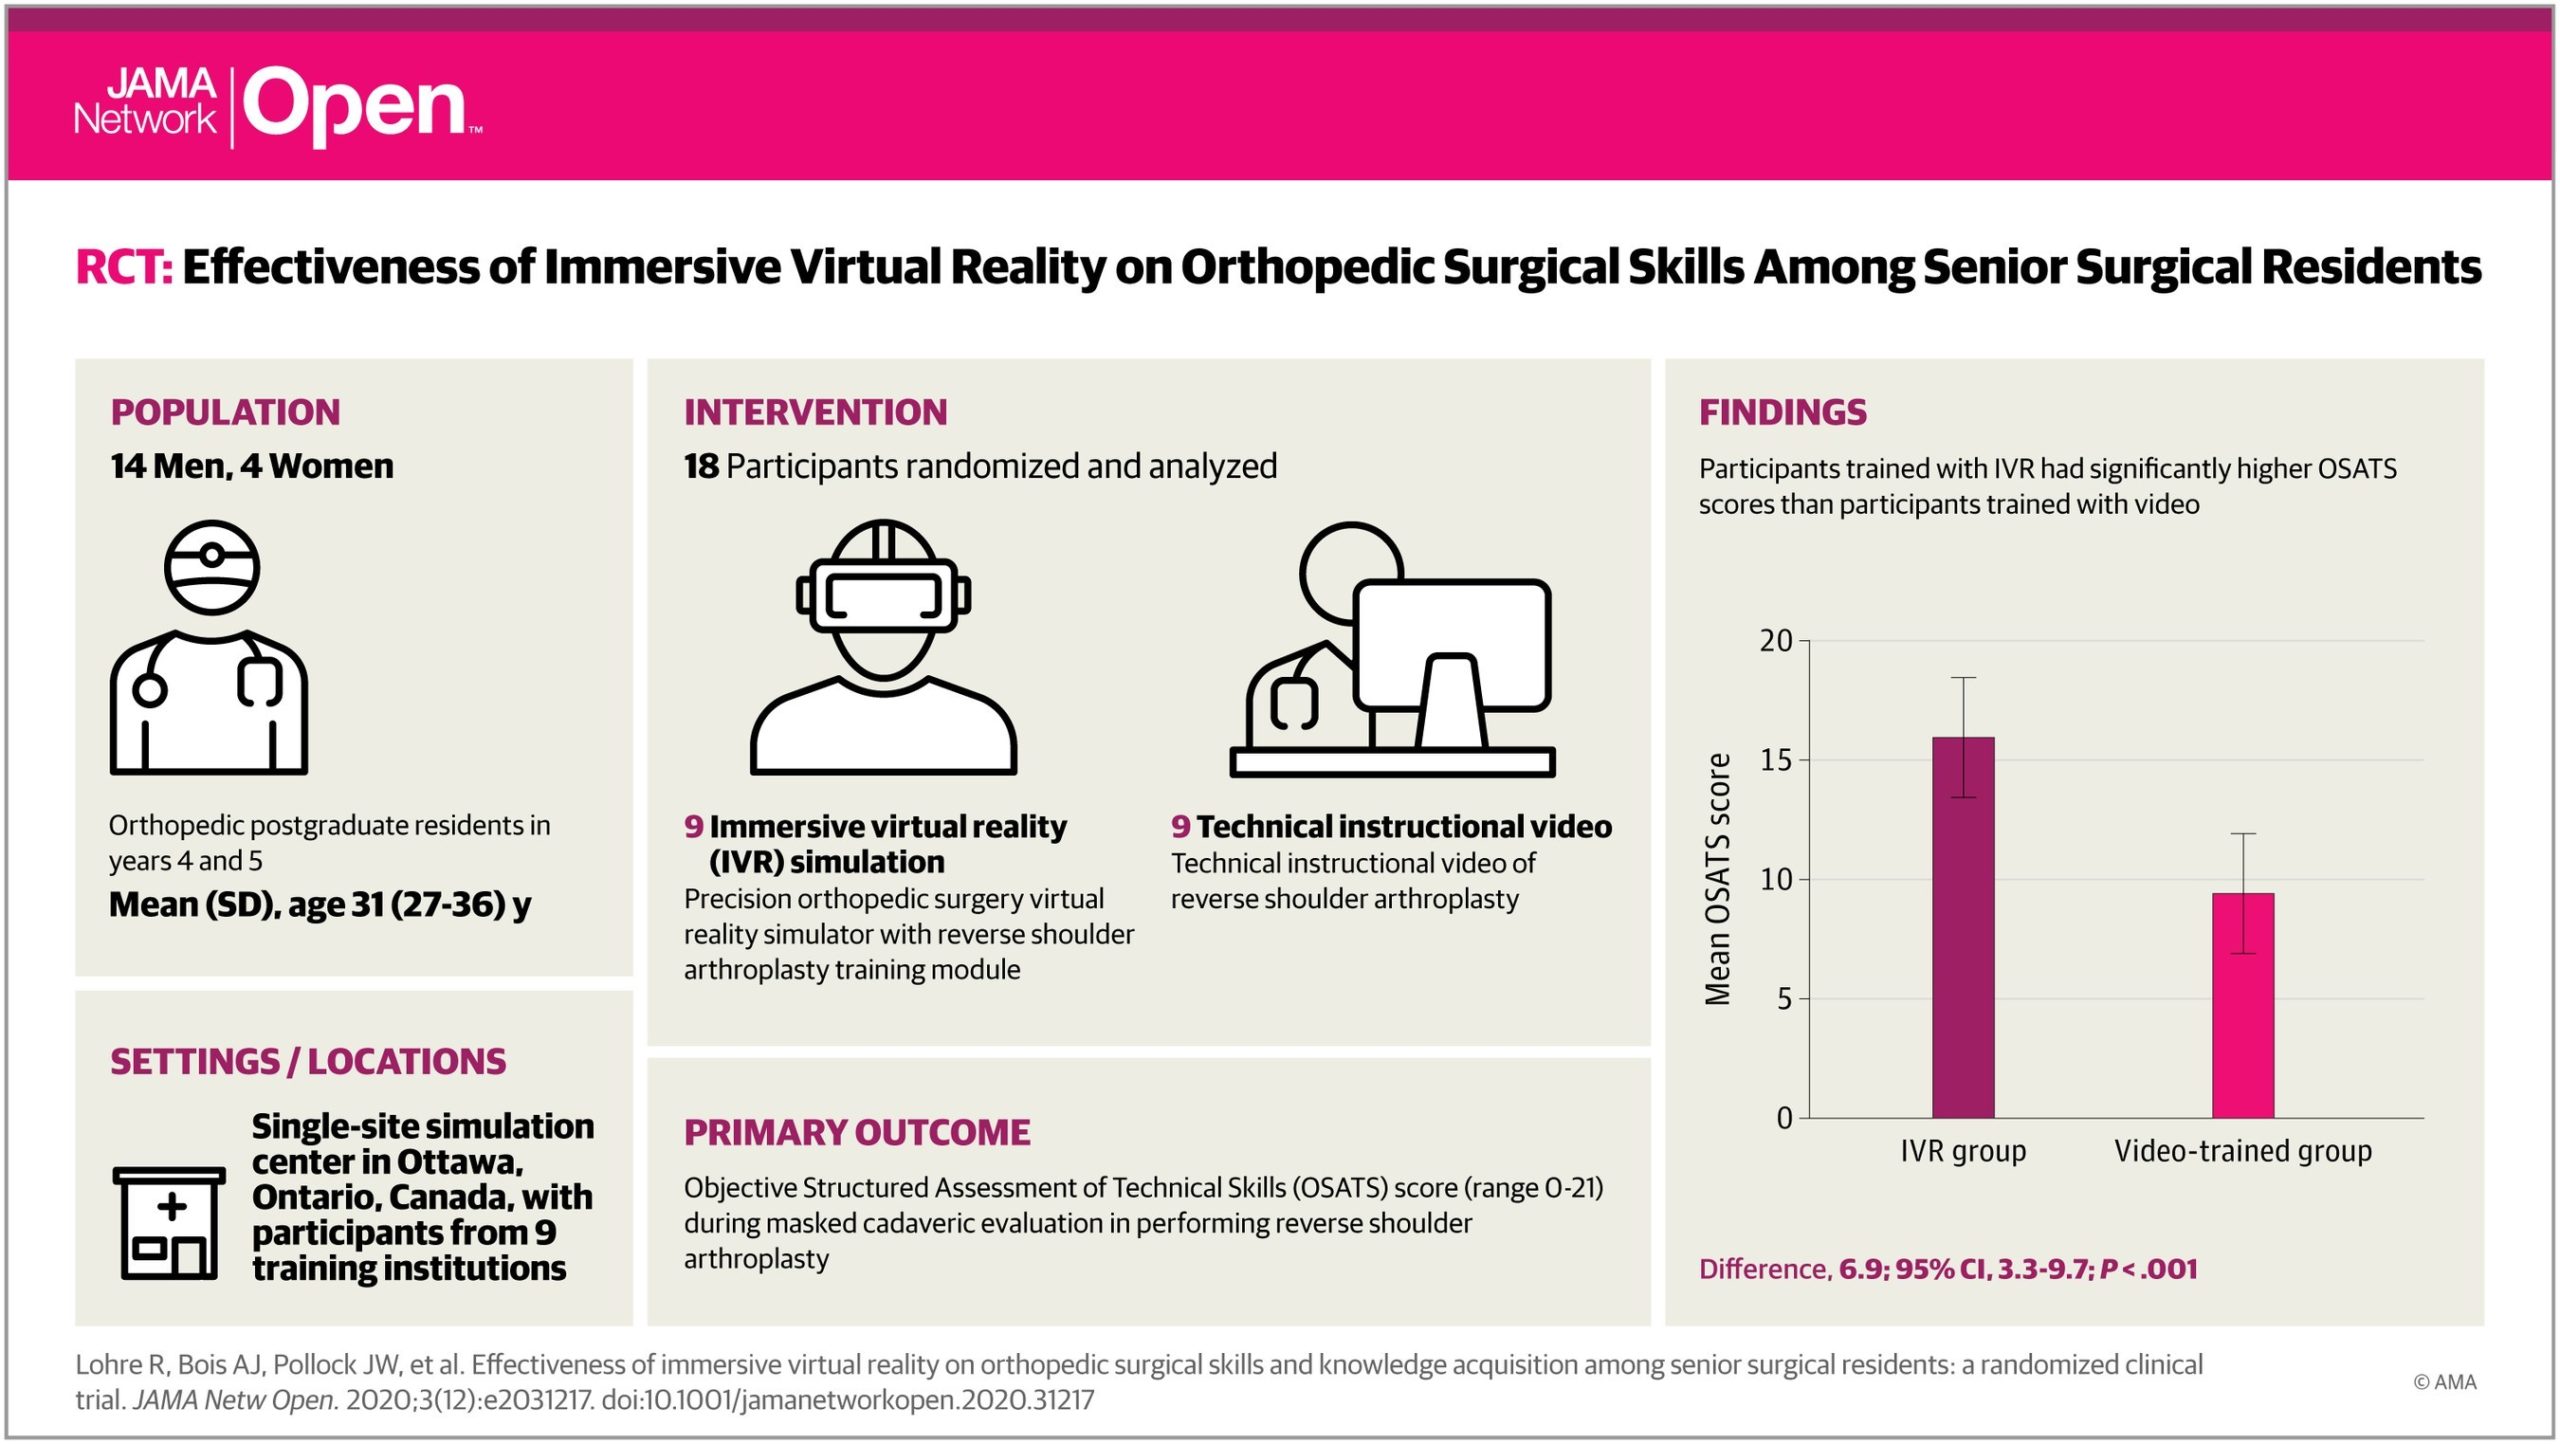 UConn Health is training orthopaedic surgery residents using VR solutions  from PrecisionOS? and Oculus - PrecisionOS